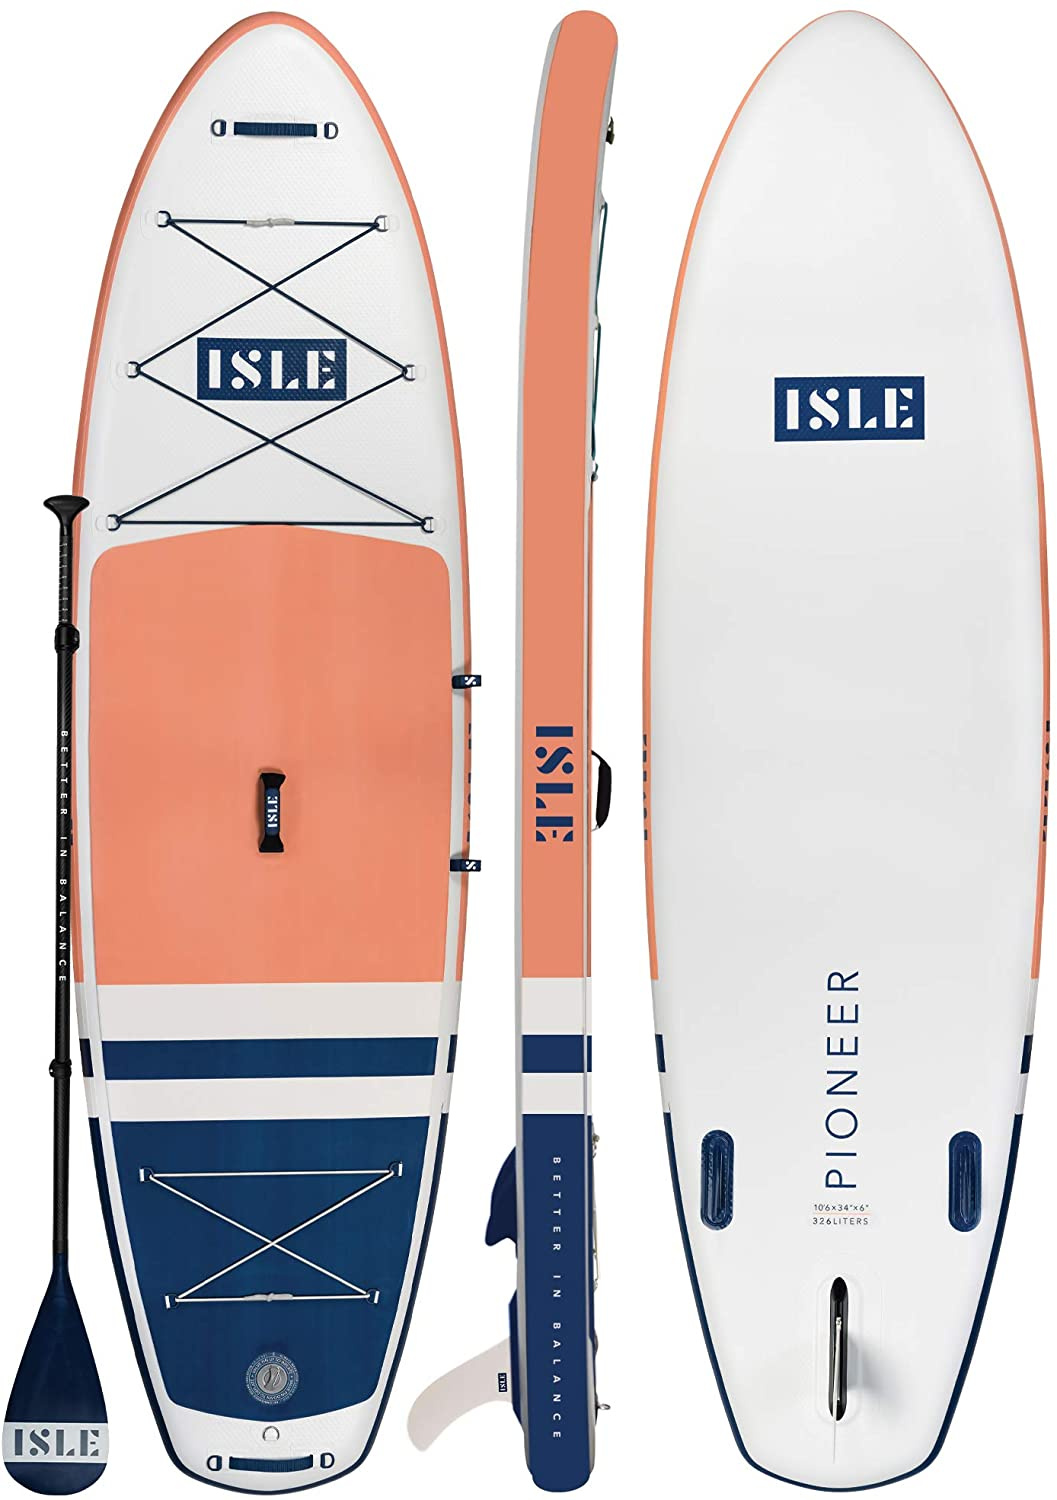 Best Inflatable Stand Up Paddle Board That's Packable and Easy to Tote